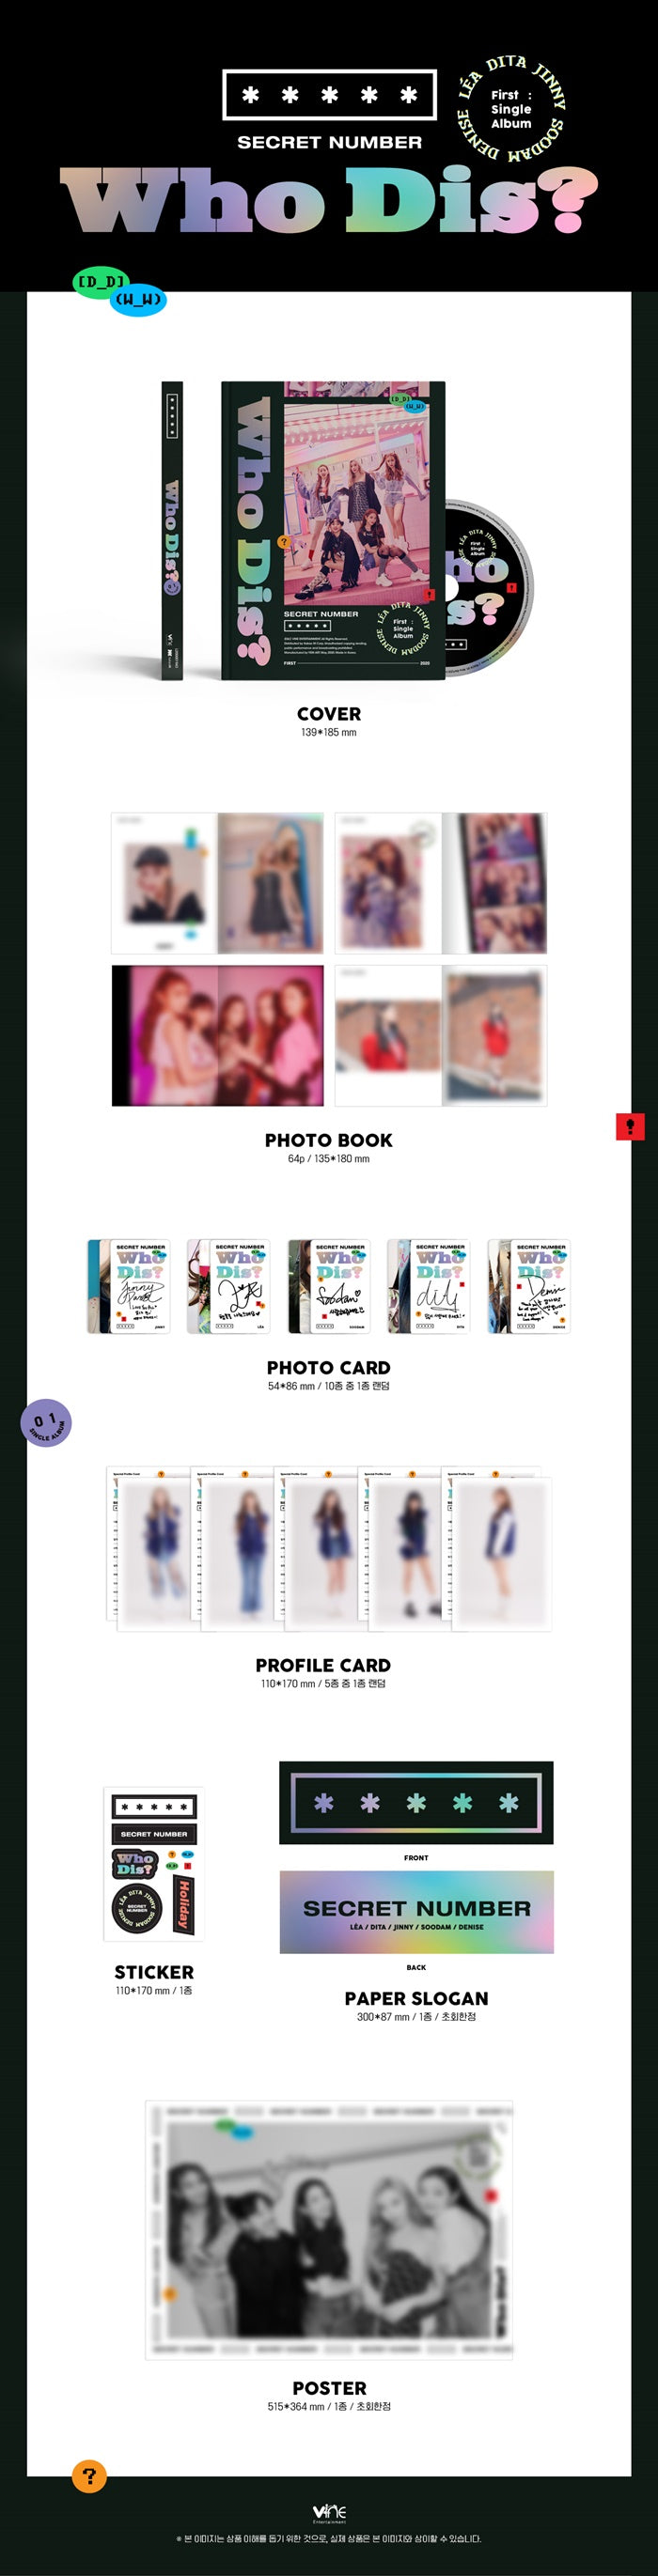 1 CD
1 Photo Book (64 pages)
1 Photo Card
1 Profile Card
1 Sticker